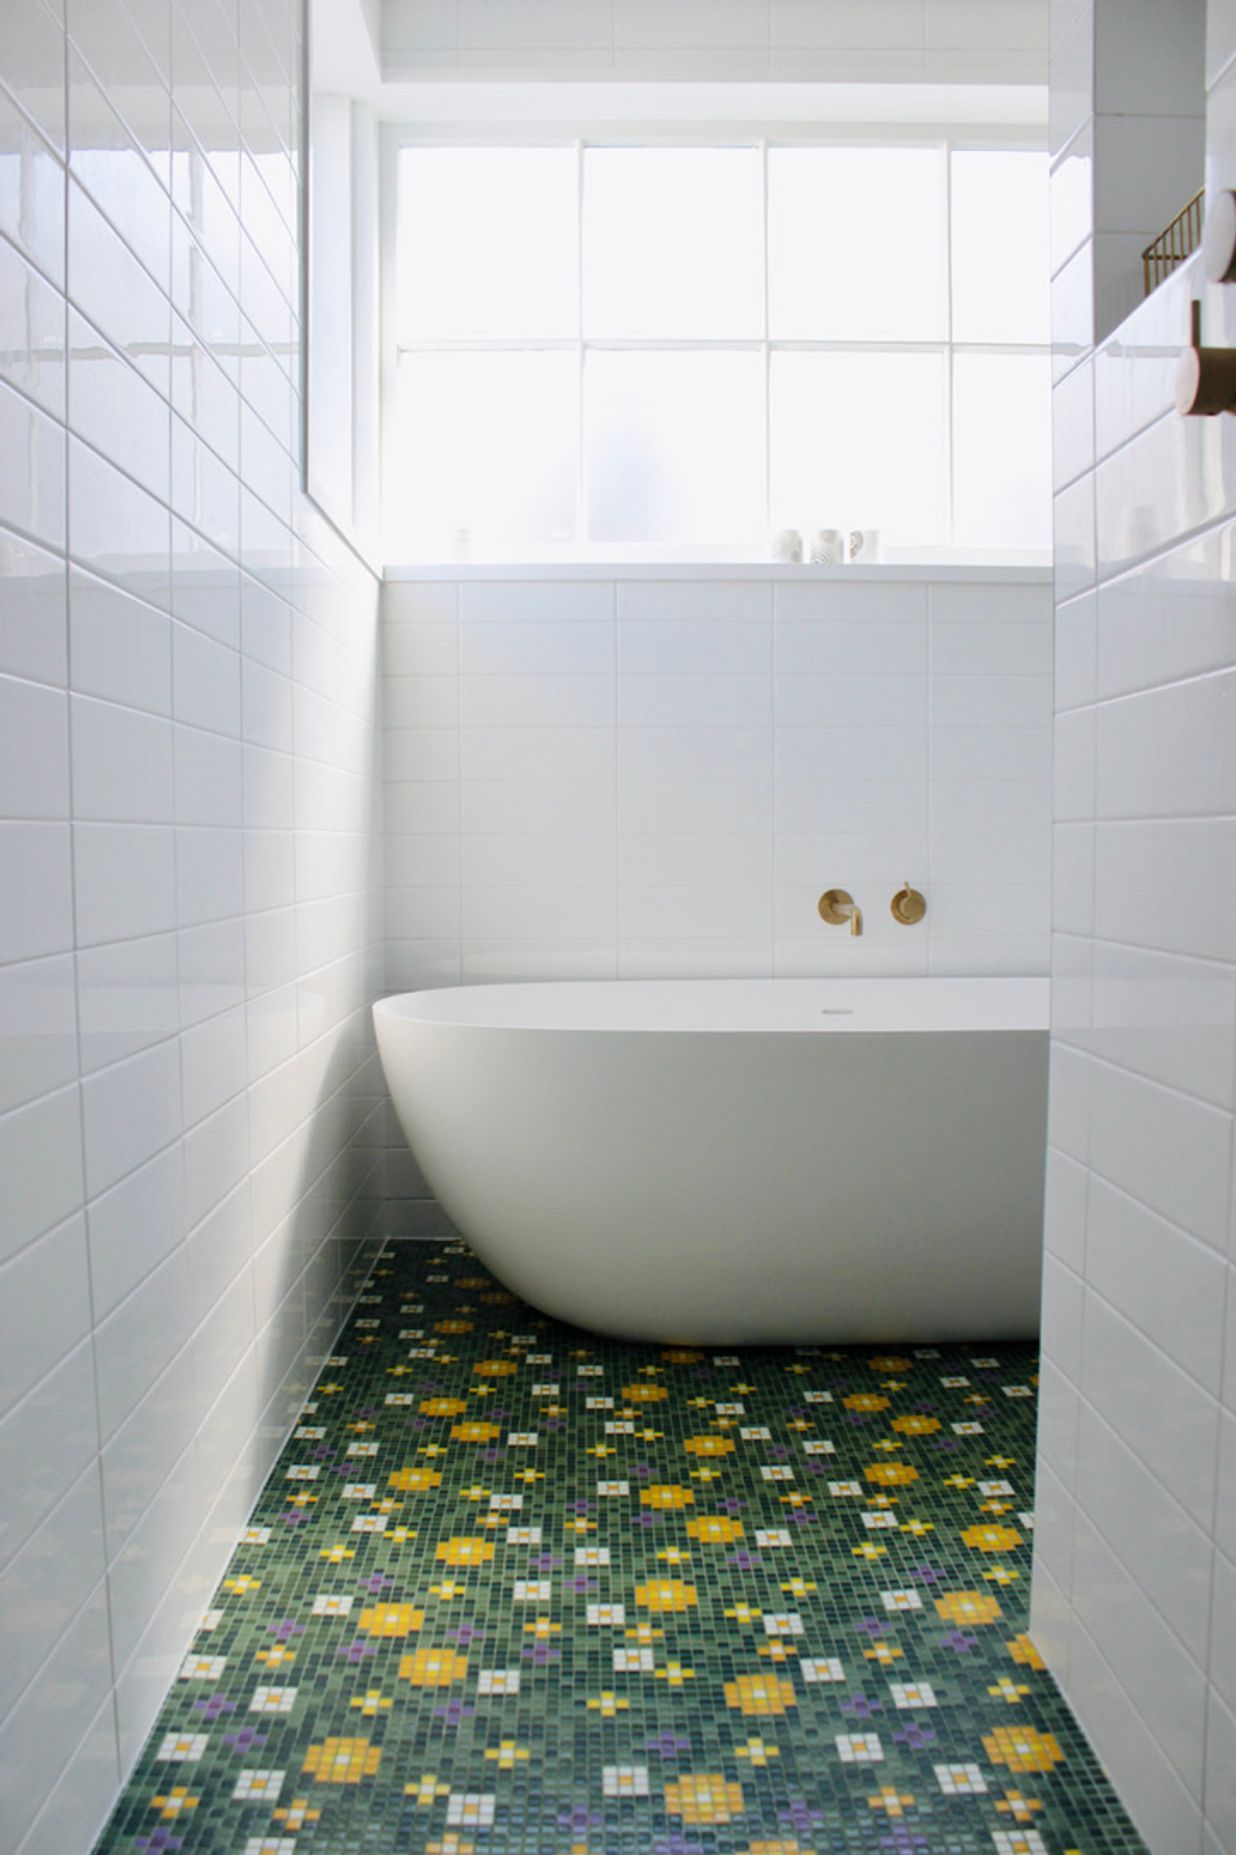 The family bathroom renovation by Ben Gommers at Gommers Construction. The Bisazza tiles are glass and needed a specialist tiler to work with the epoxy resin grout. “It’s quite an art,” says Ben.